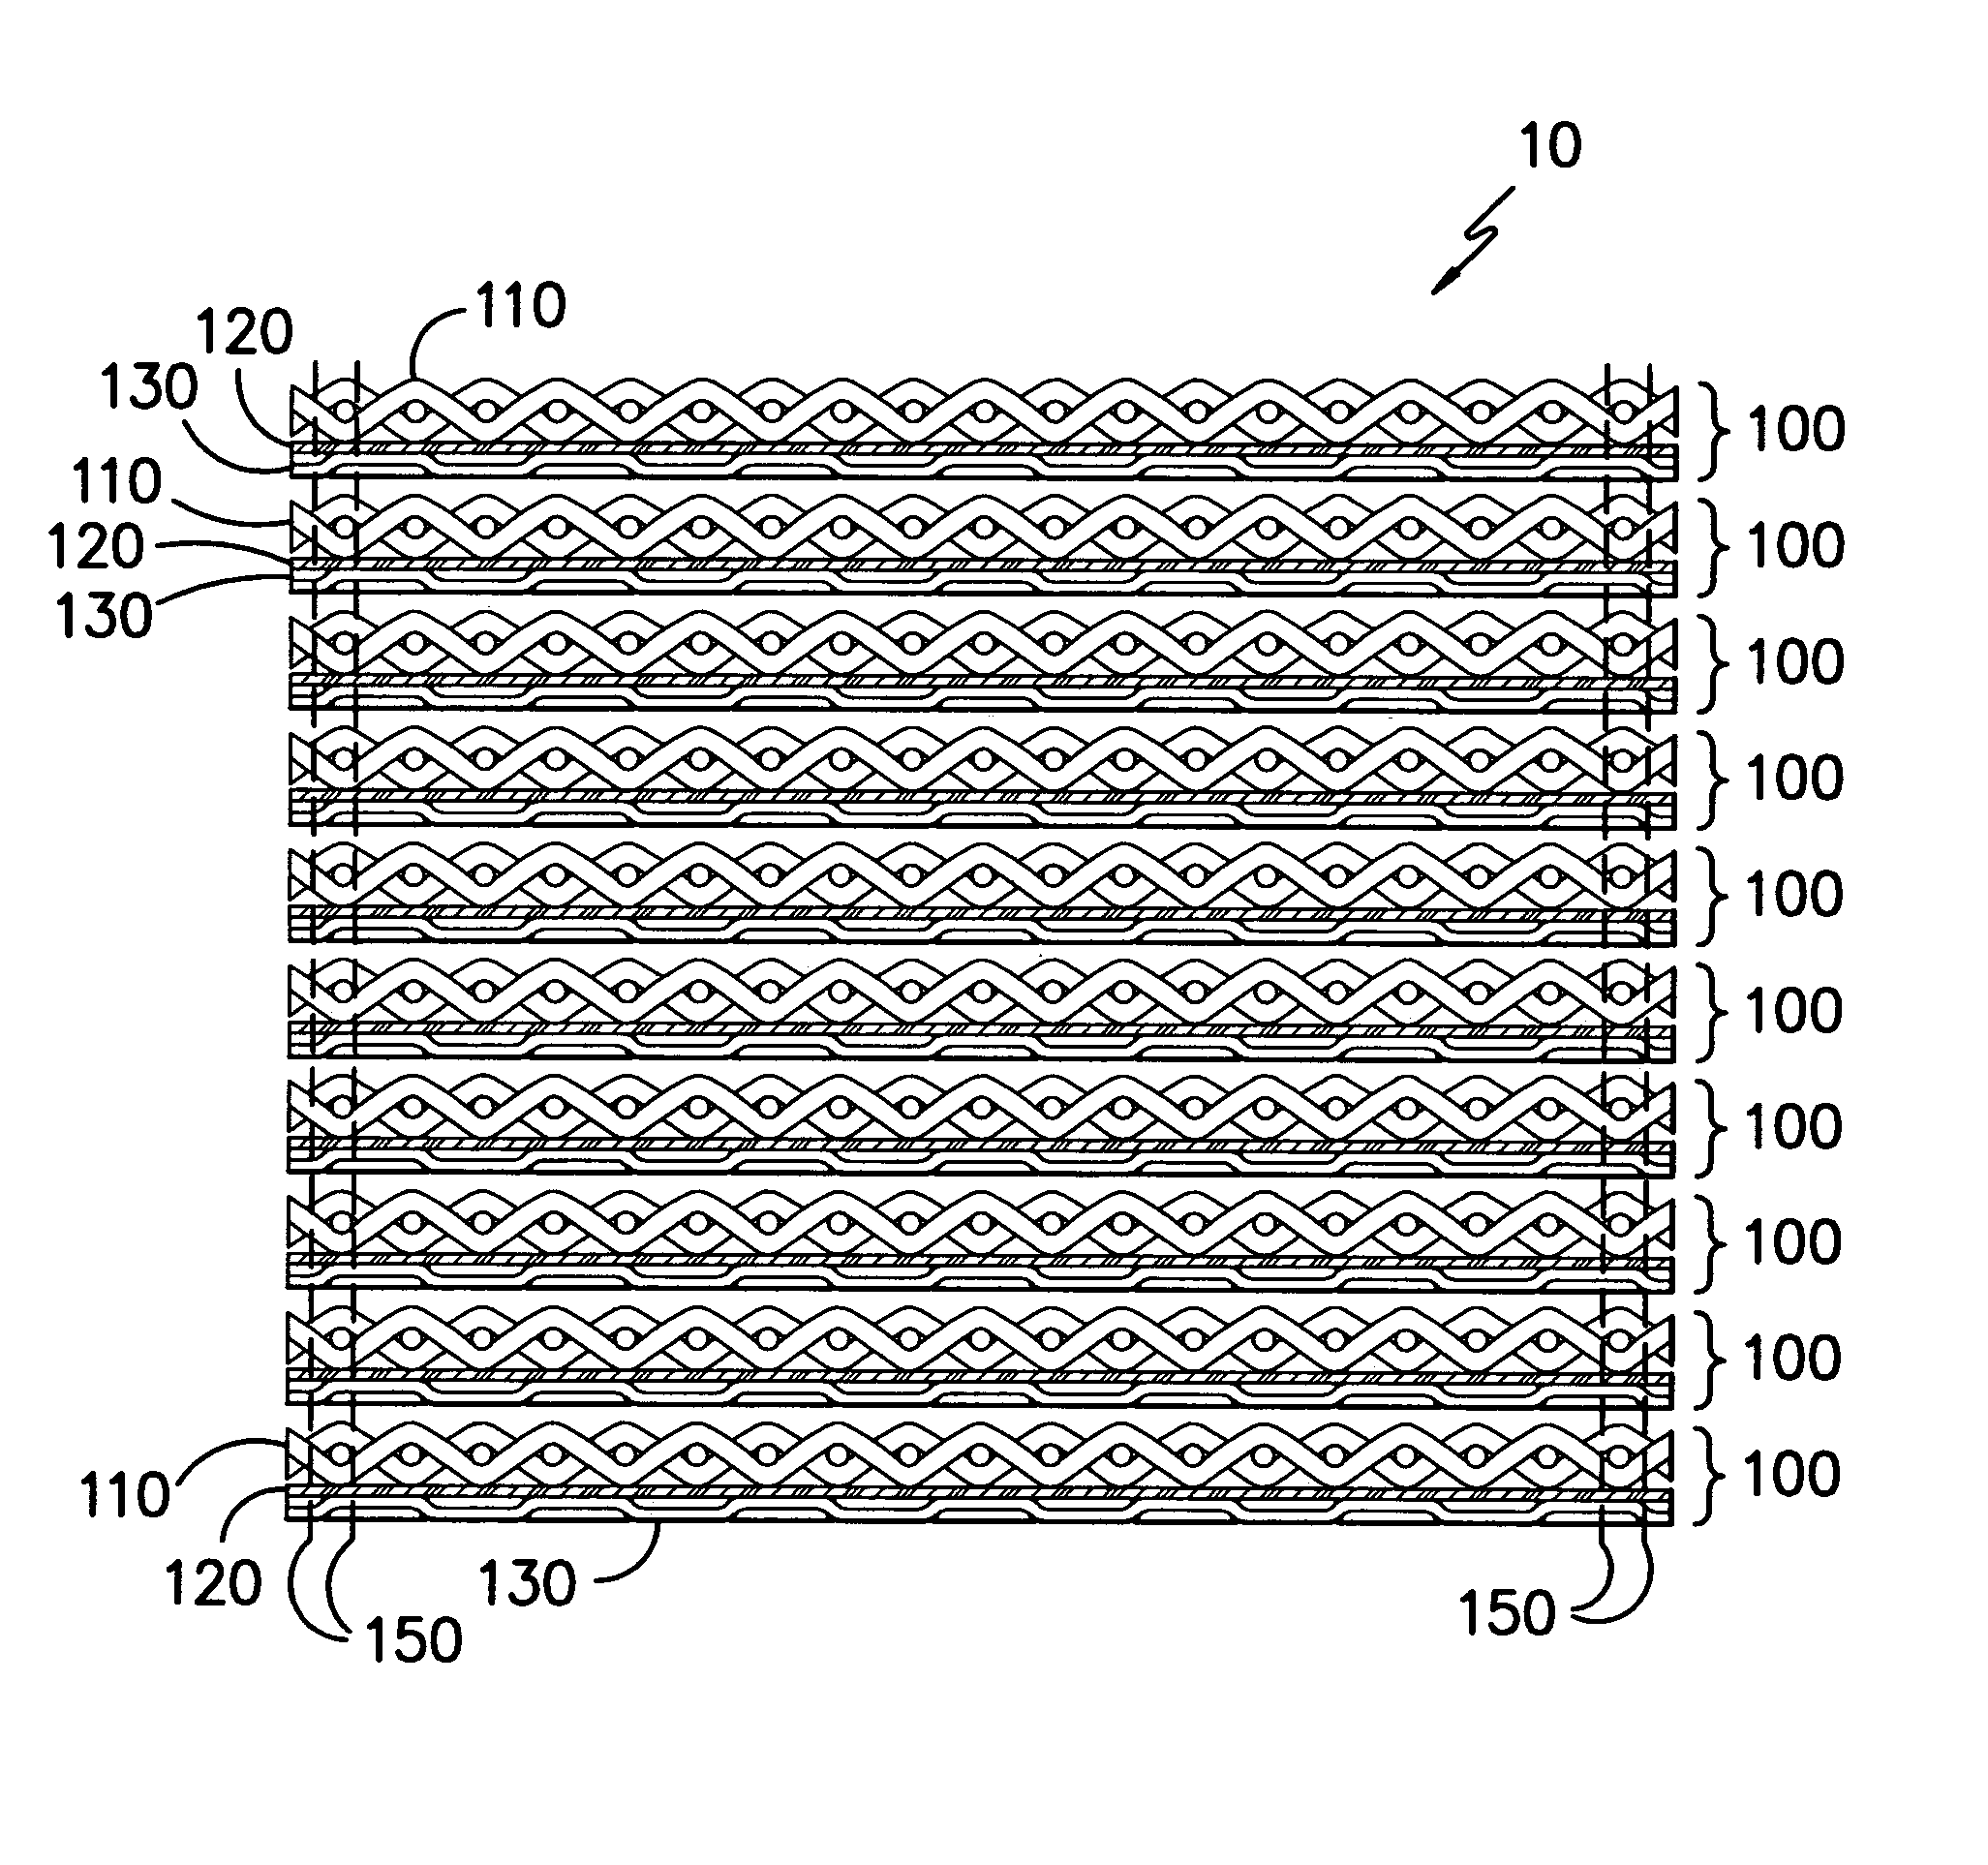 Flexible spike and knife resistant composite